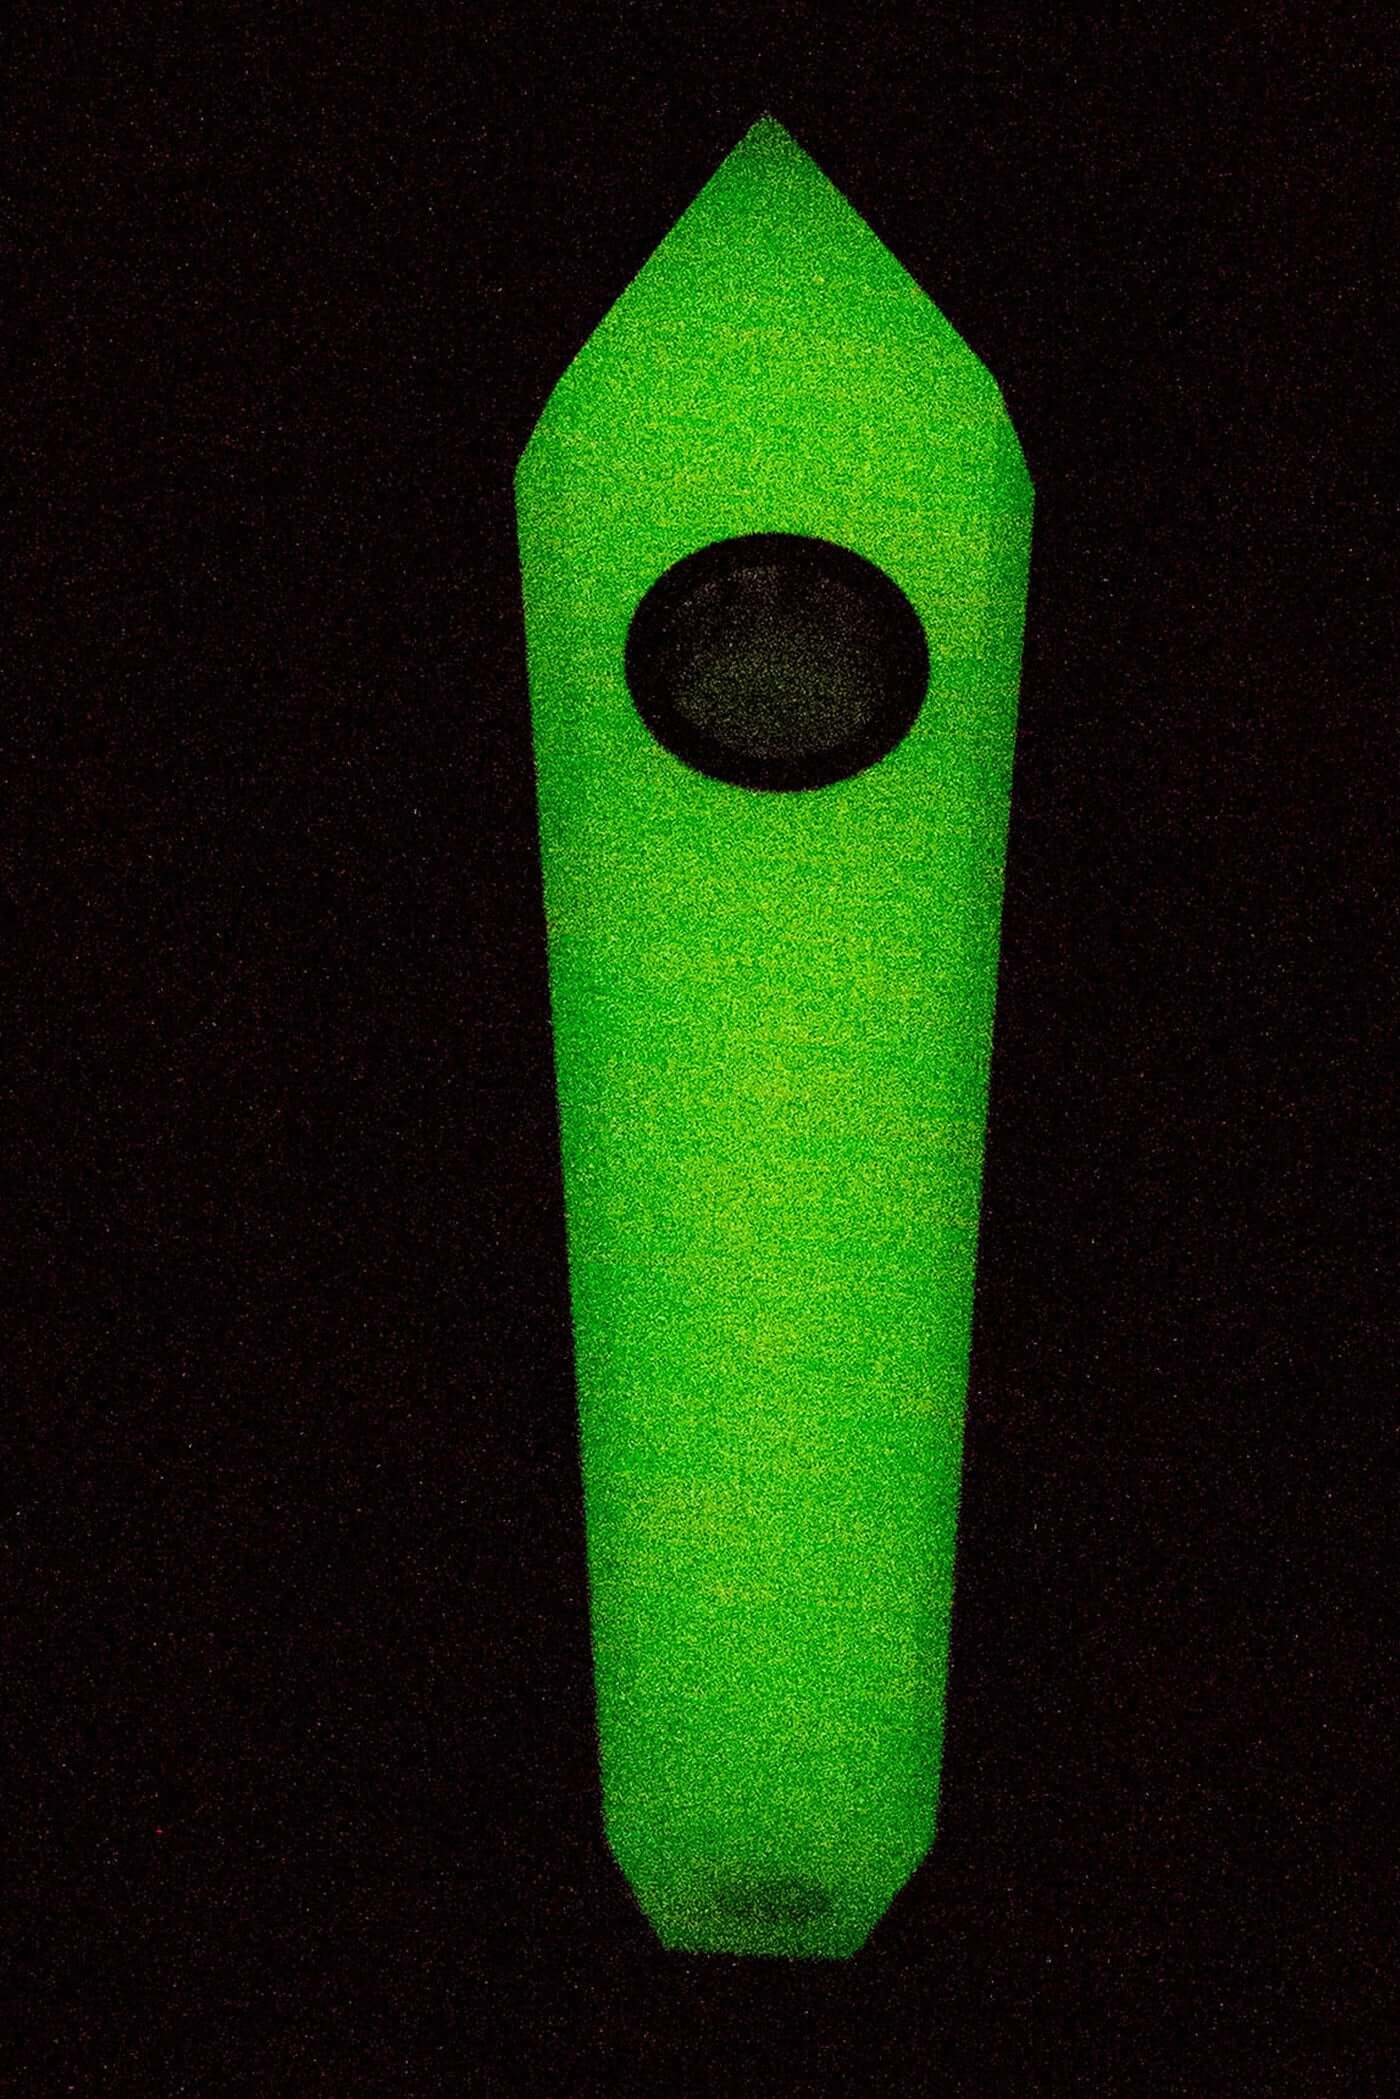 Acid Secs - Glow In The Dark Luminous Crystal Stone Smoking Pipe
Acid Secs Productions Inc.
This glow in the dark crystal stone pipes made from semi-precious stones will transcend you to a new high and put you in touch with your spiritual side. Functional, durable and easy to clean, and a safe high-quality filter. (Quartz pipes should be cleaned using the same procedure as when cleaning glass pipes). Size : 4.25” X 1” 3 x Bowl screens Pipe Cleaner Durable Easy to clean GLOW IN THE DARK Eligible for $15 Flat